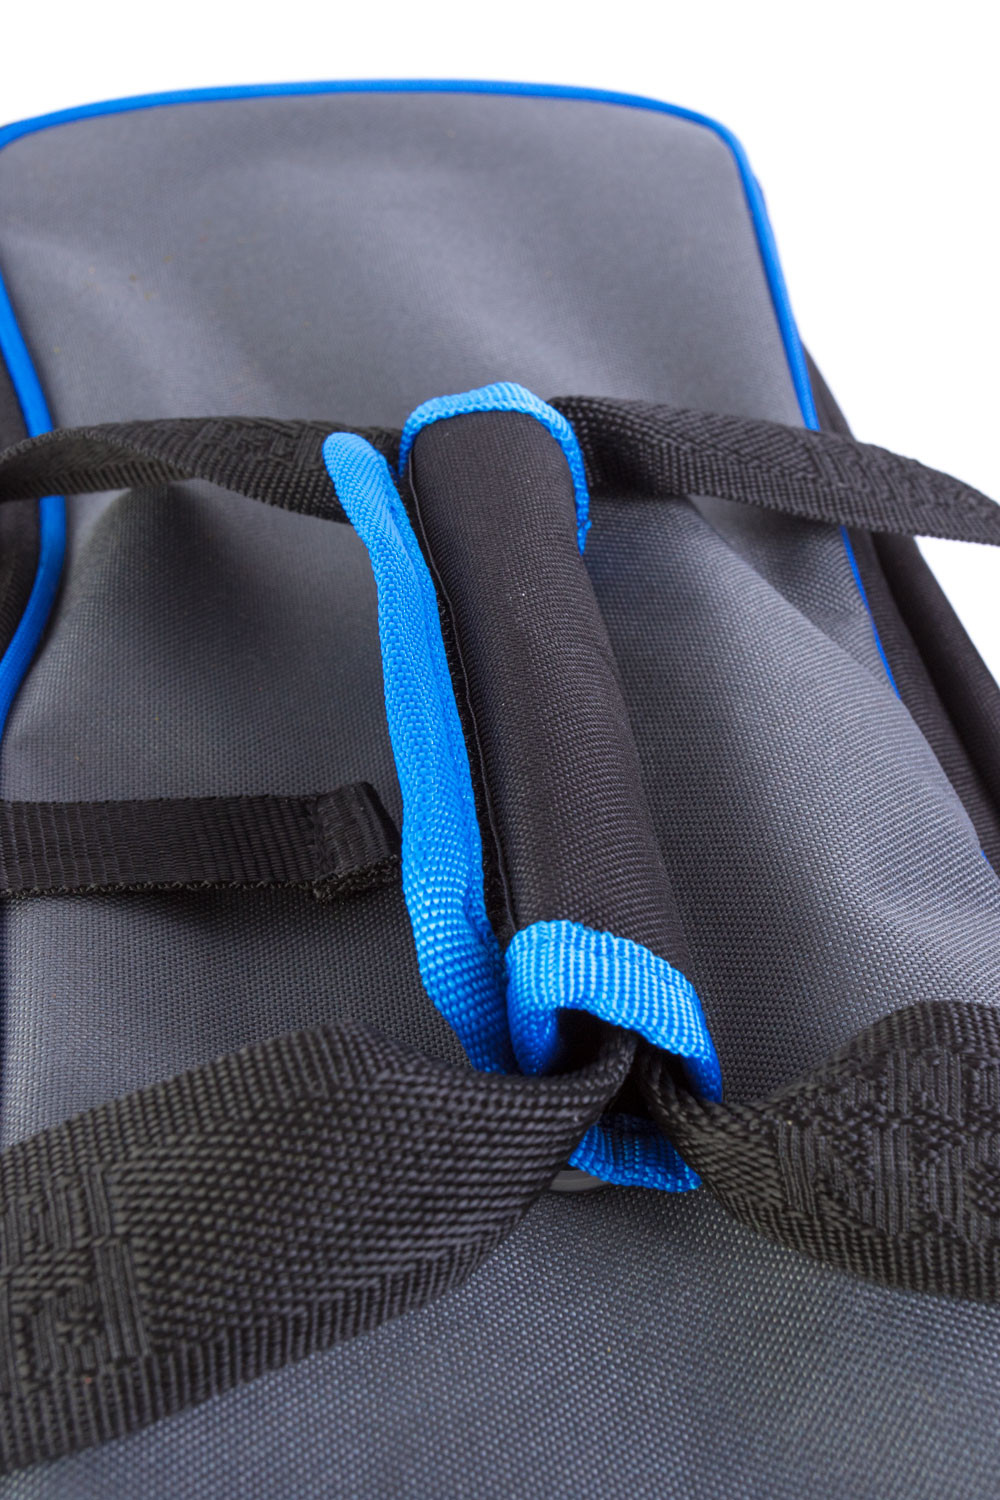 Image of Competition Double Net Bag by  Innovations